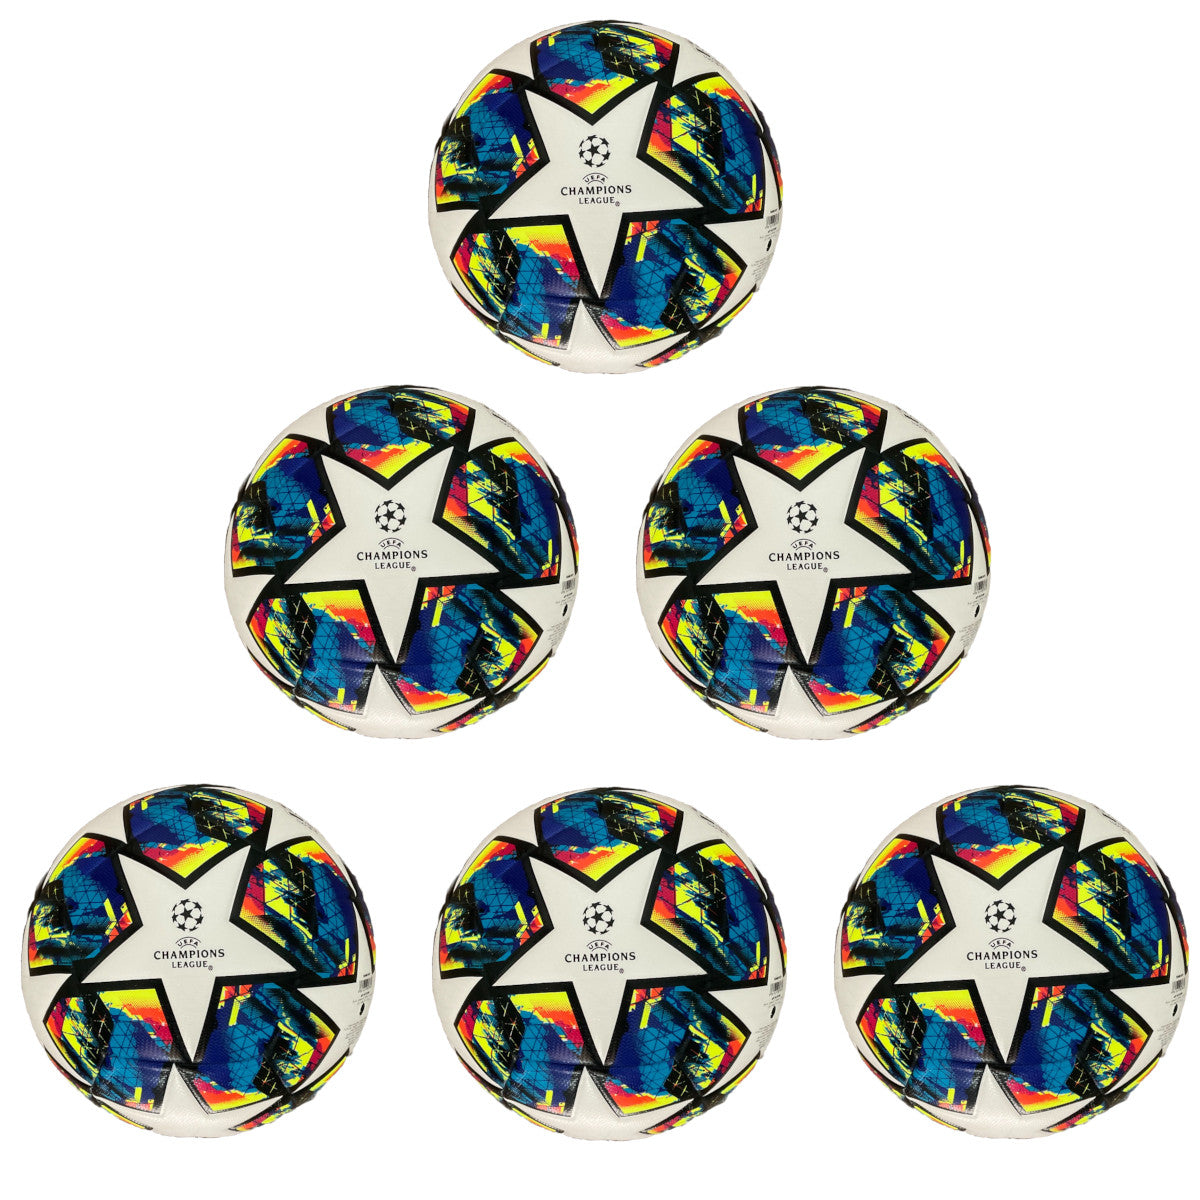 Soccer Ball Size 5 Pack of 10 Champions League Tricolor for Training or Game